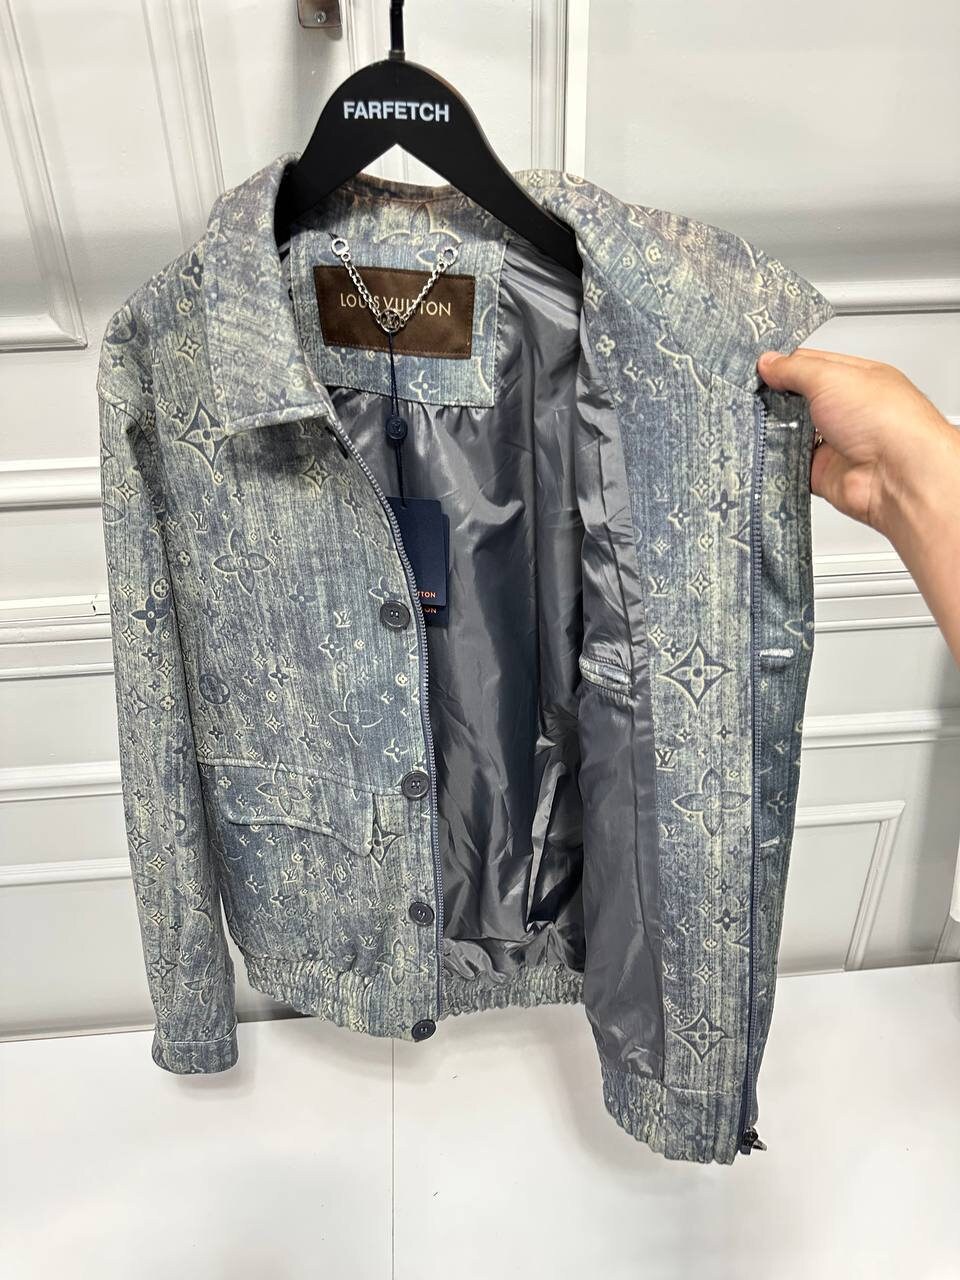 Louis vuitton denim jacket hoodie sweatpants pants lv luxury clothing  clothes type 67 hoodie outfit ideals for men and women